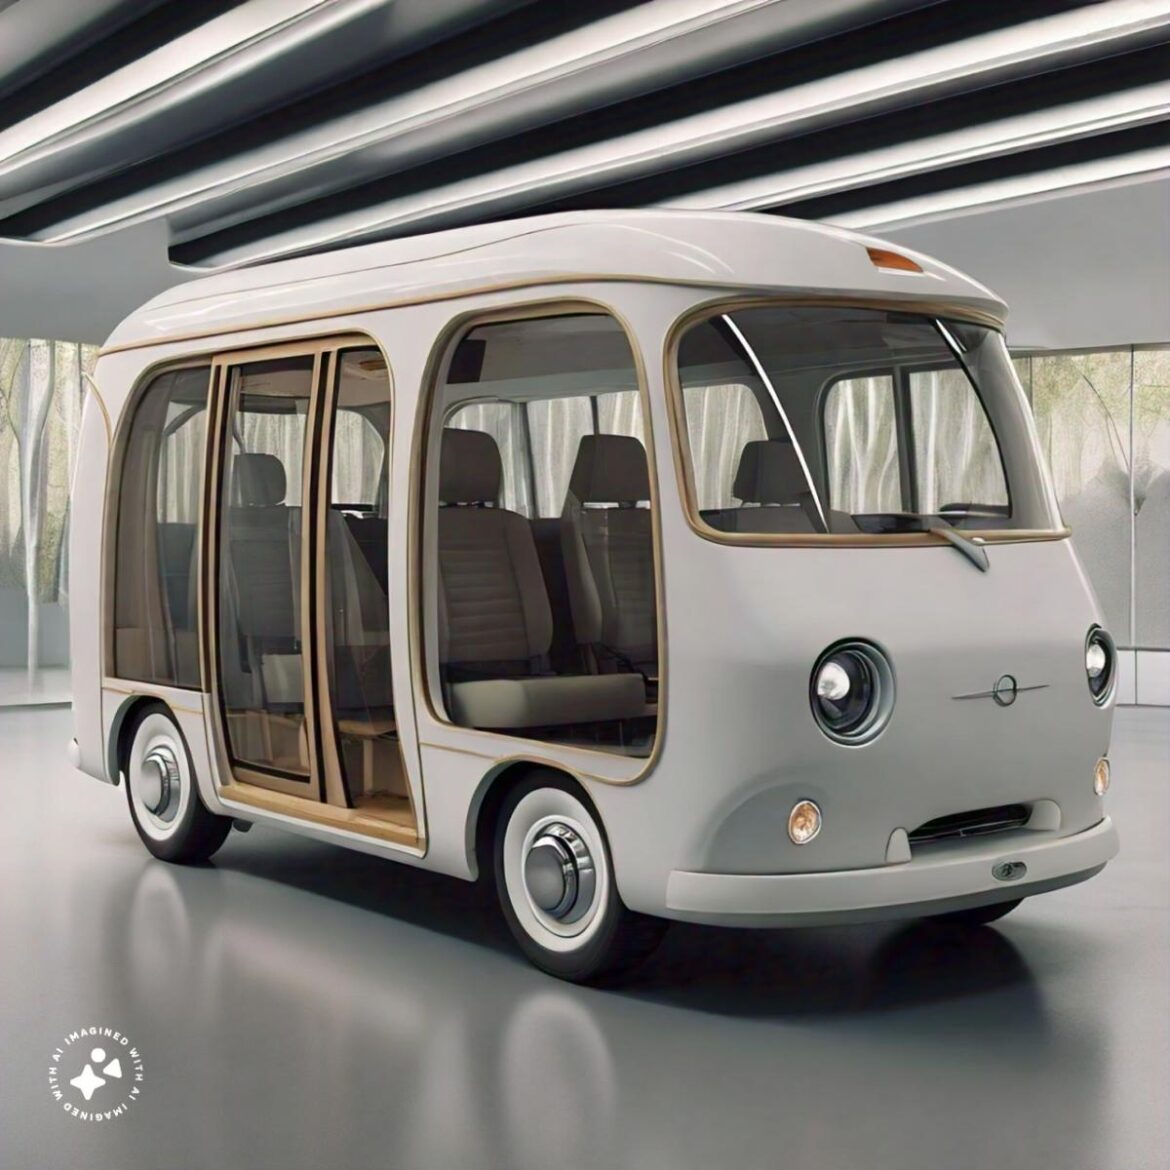 AI has spoken: the Apple Car would have been adorable